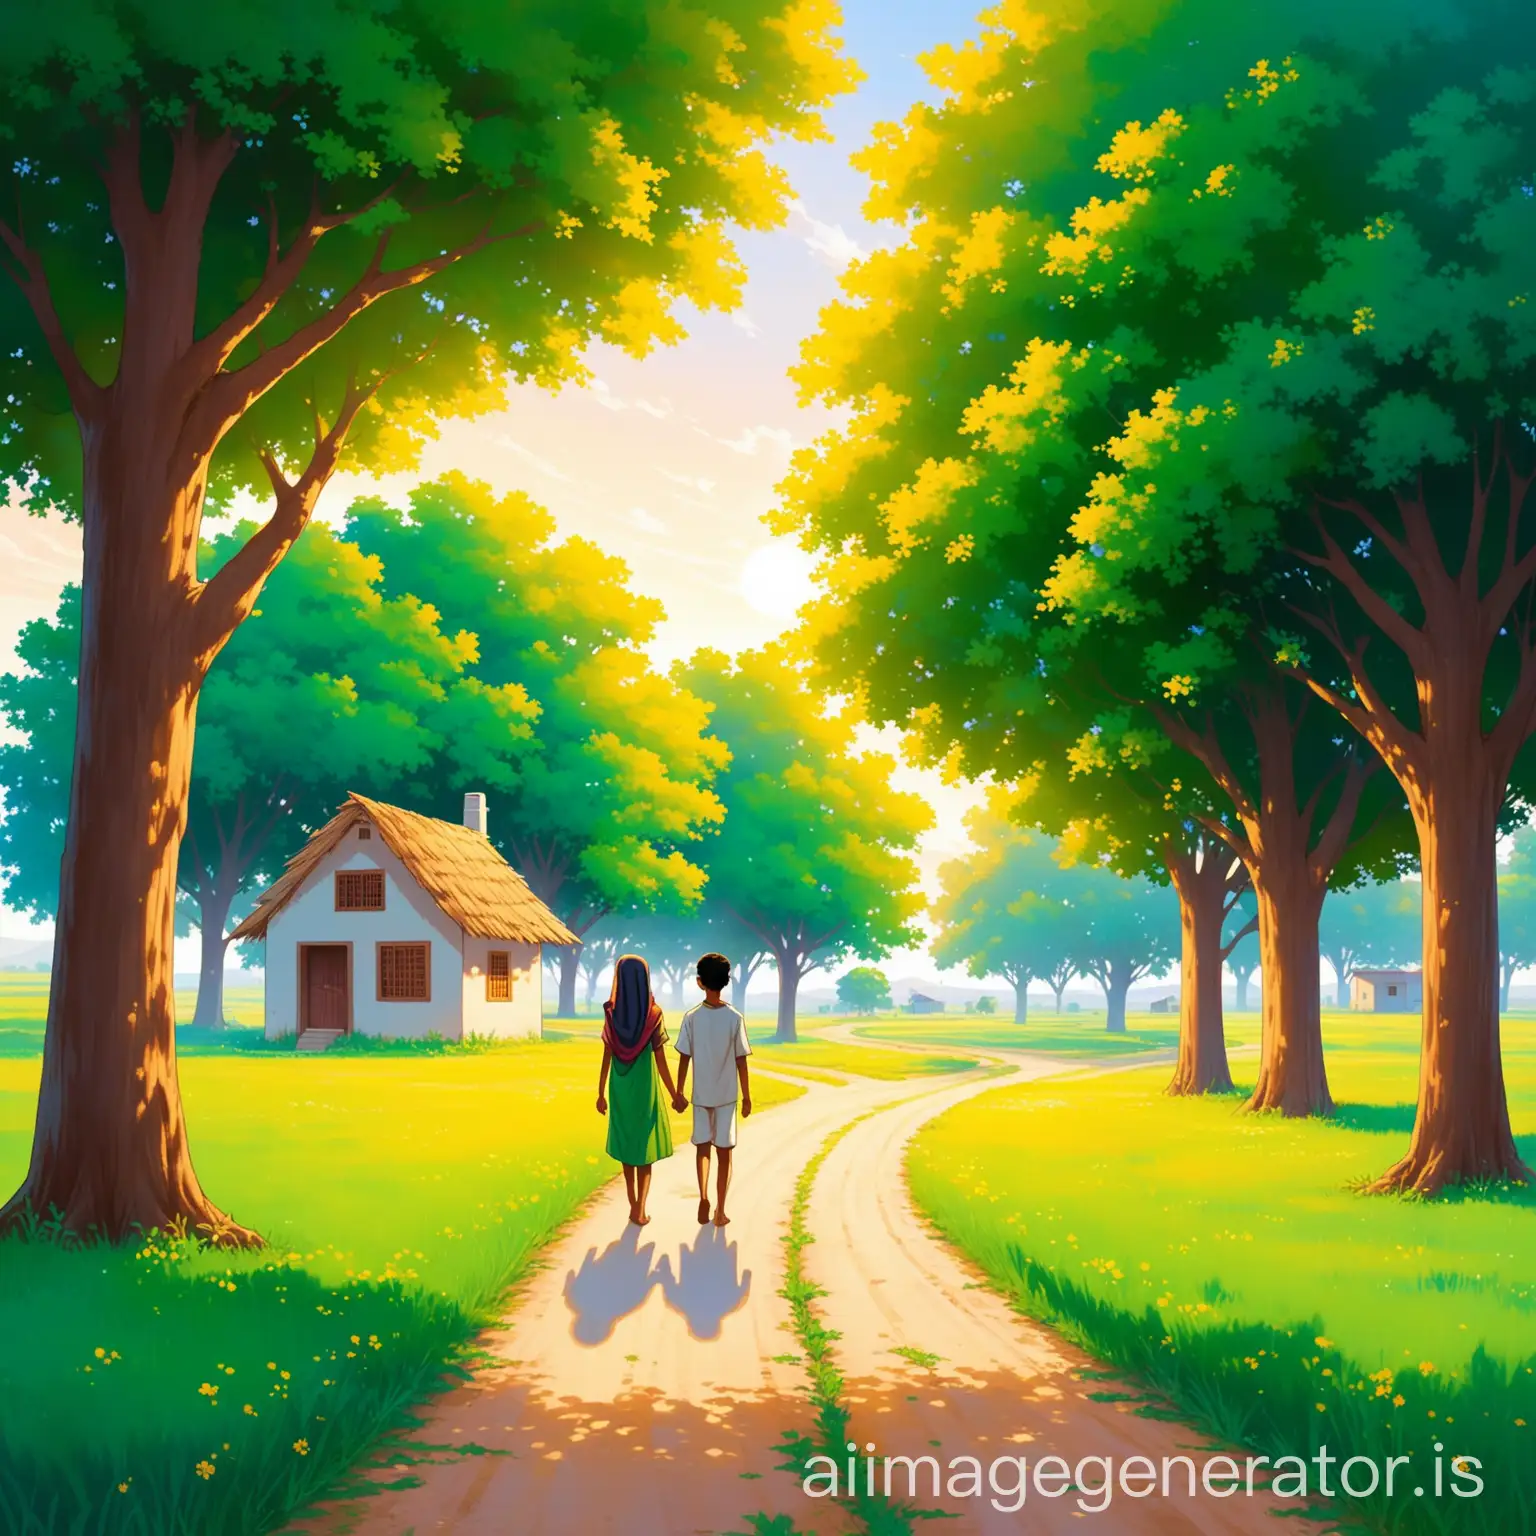 Maya-and-Ahmed-Childhood-Friends-in-a-Picturesque-Countryside-Setting